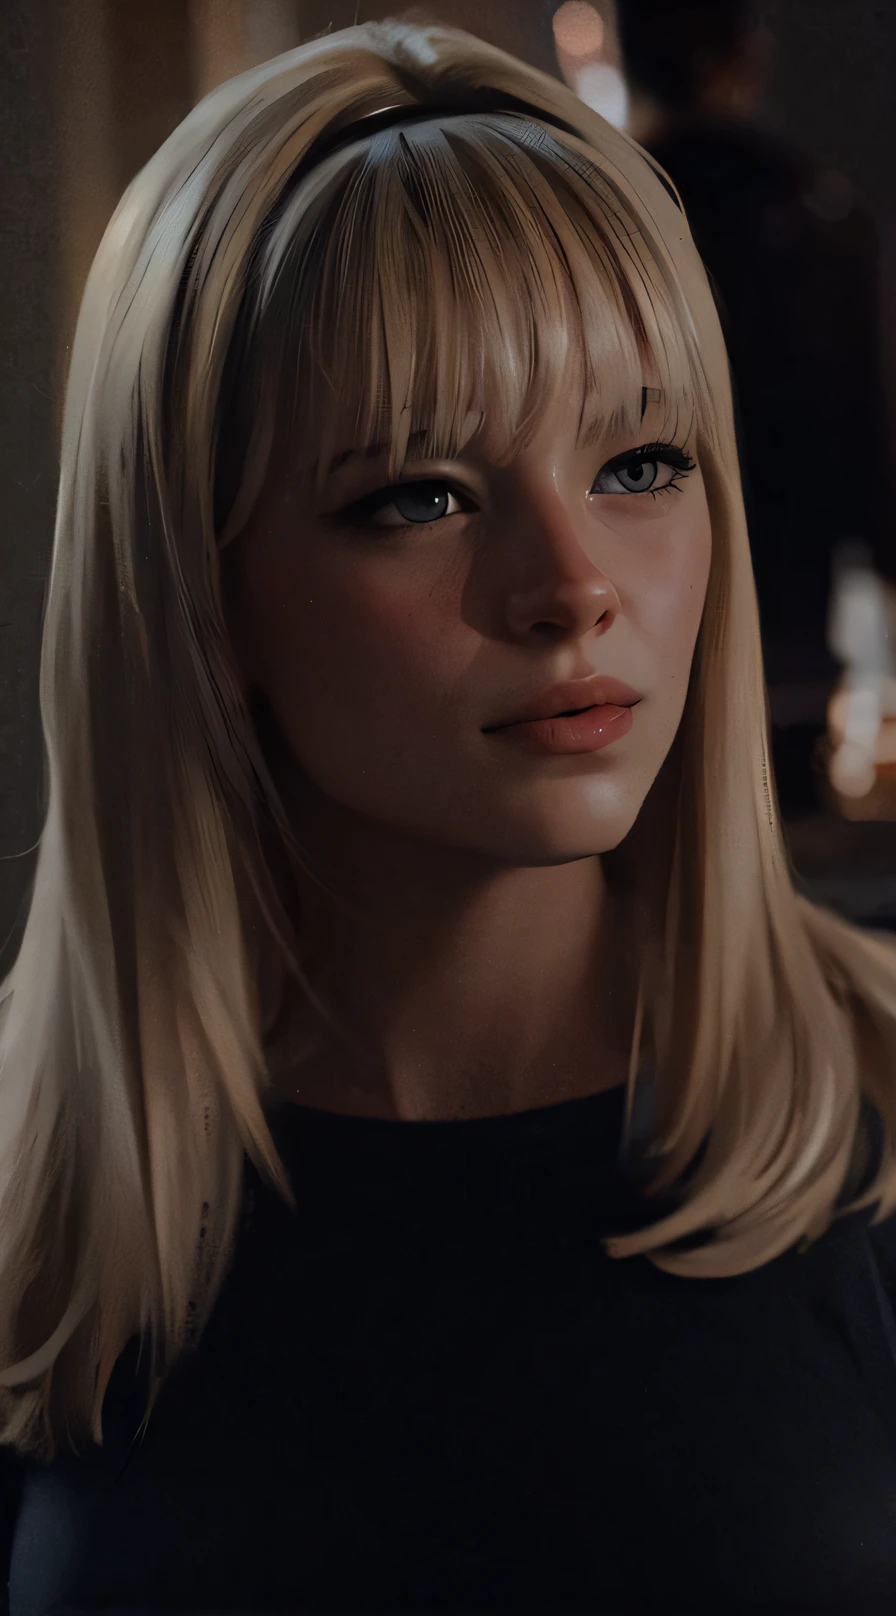 Realistic,Cute,Film and Television,Fan-made Character,Love,Star,Romance,This is Gwen Stacy, a 16-year-old teenager who is still in love with Peter, but that can change and you have that power.